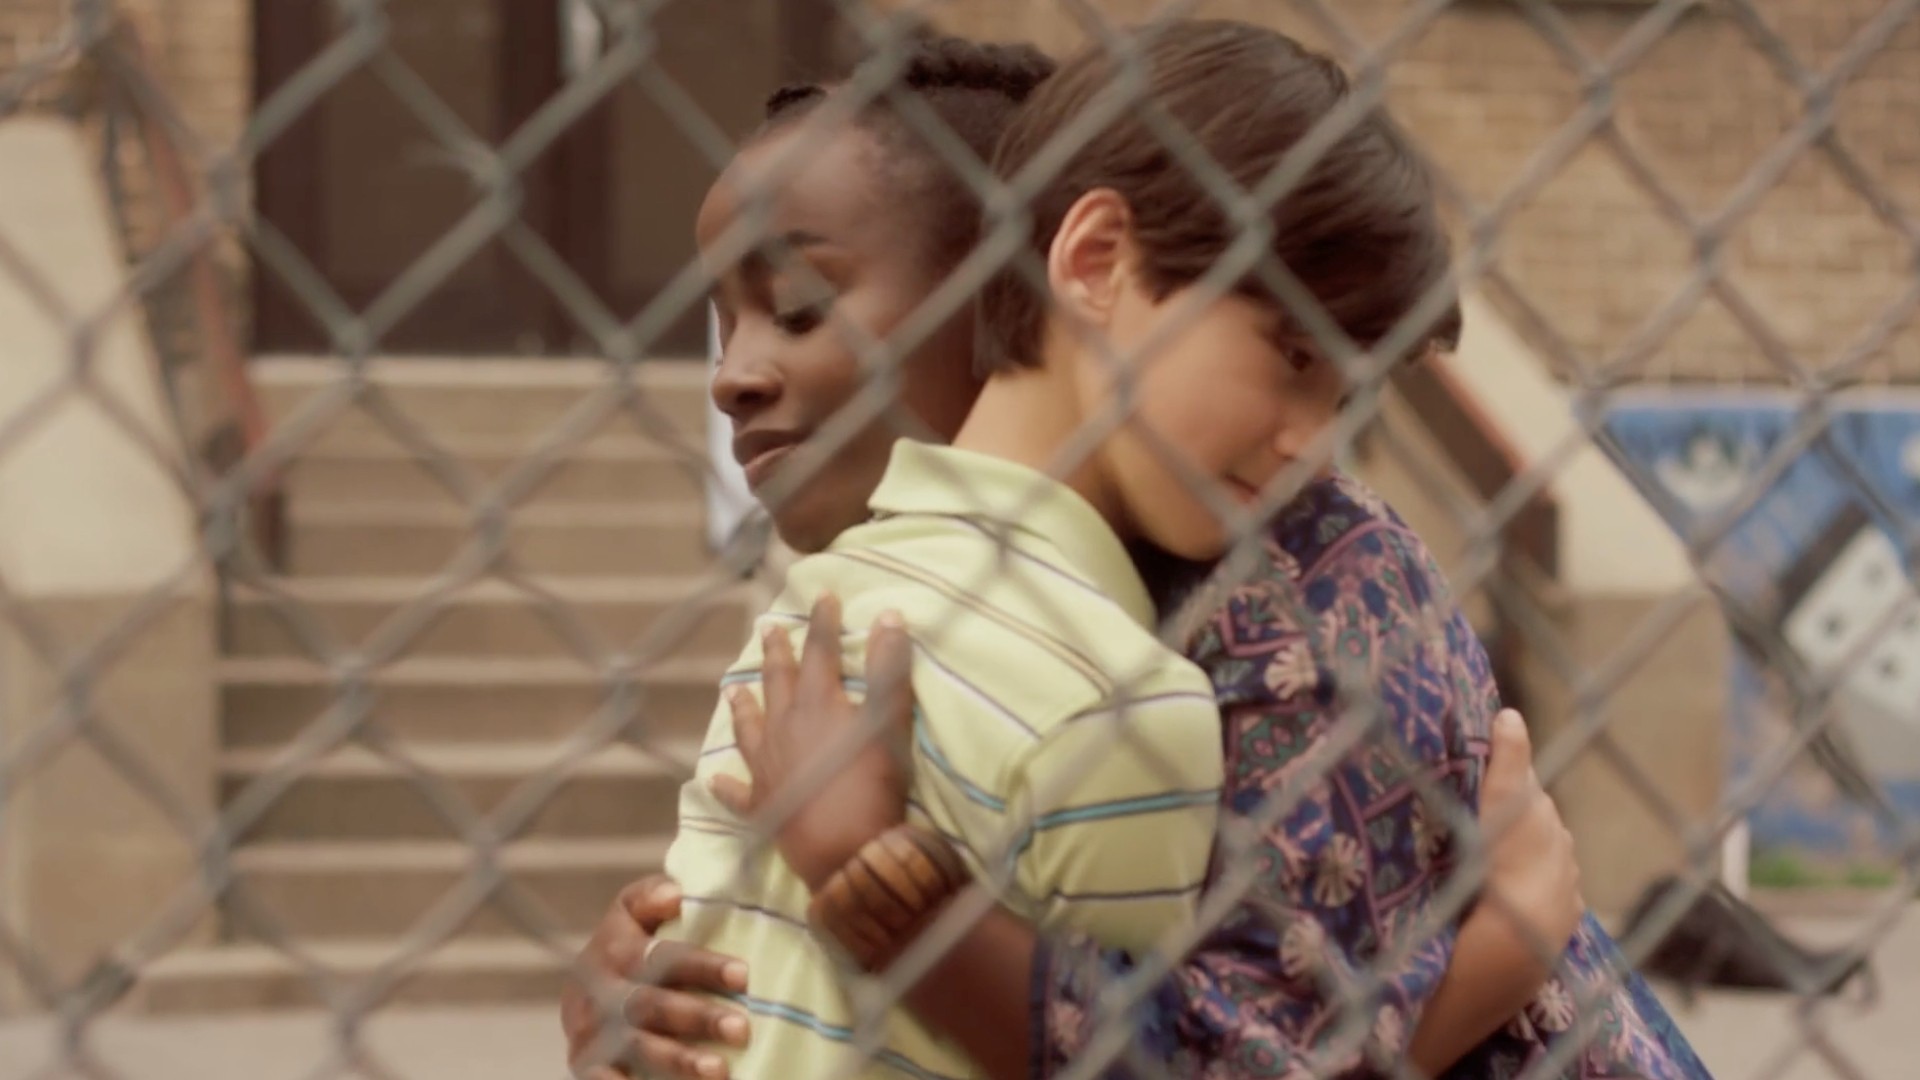 A young woman and a boy of around 12 years of age share a hug, as seen through a chainlink fence.